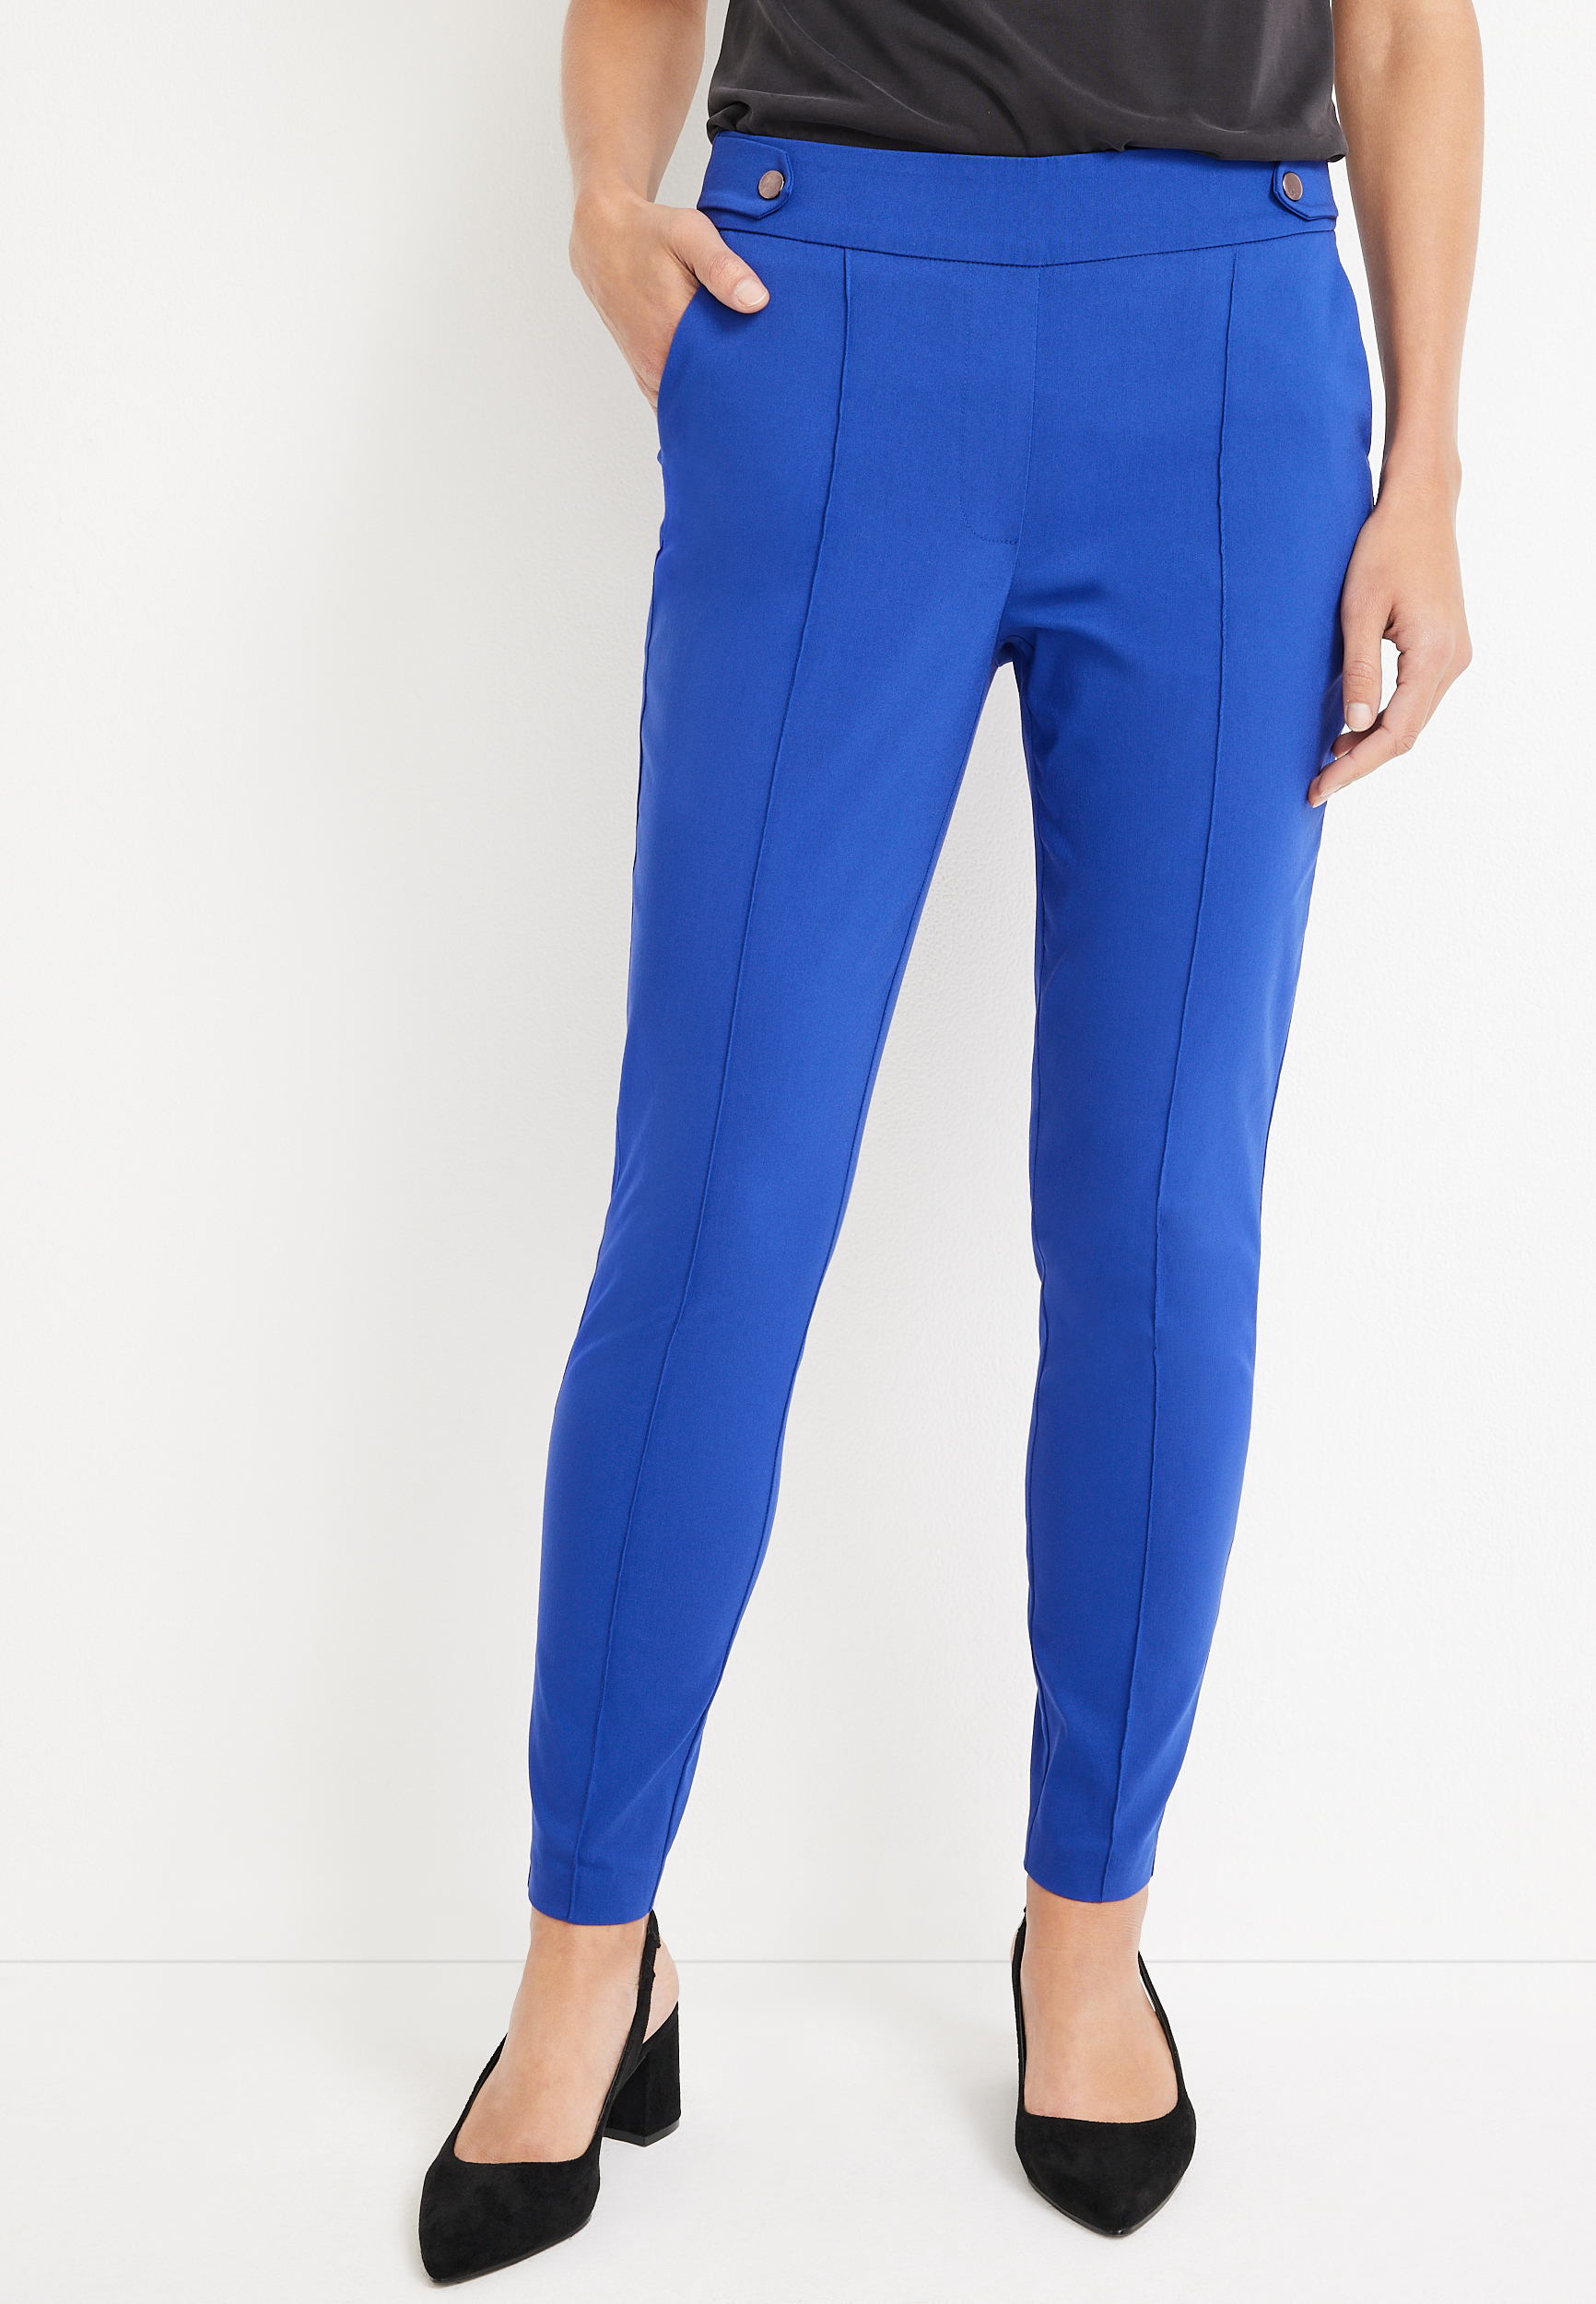 Bengaline Blue Skinny High Rise Dress Pant | maurices